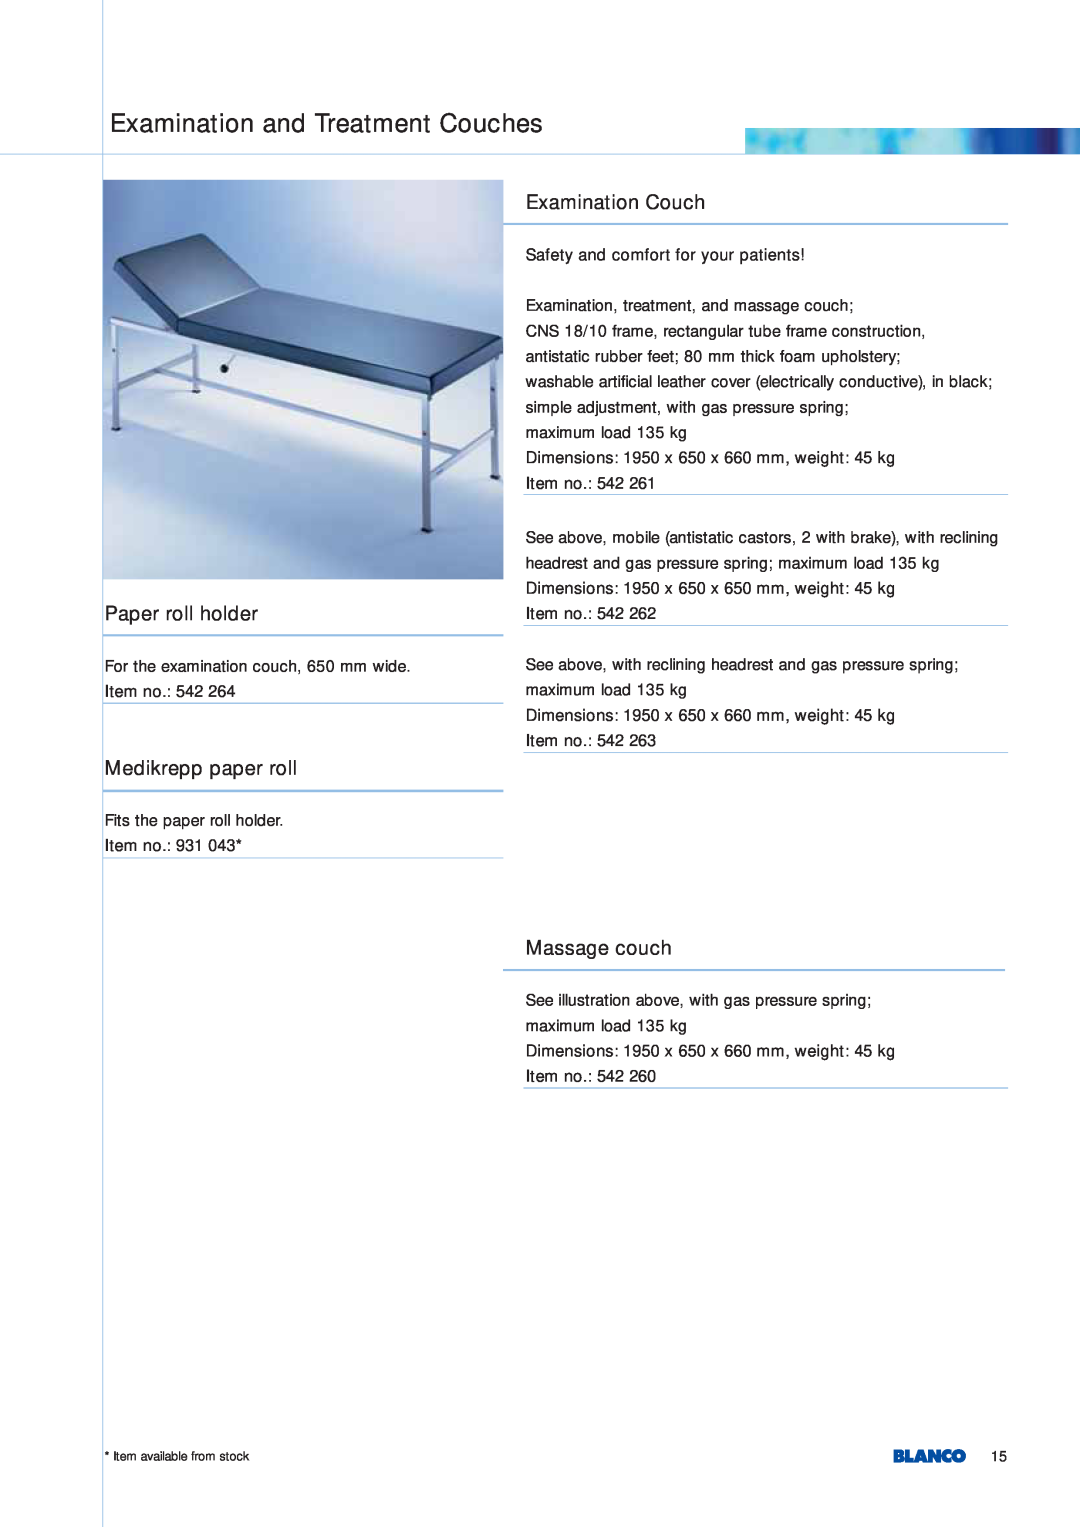 Blanco Tbingen manual Examination and Treatment Couches, Paper roll holder, Examination Couch, Medikrepp paper roll 